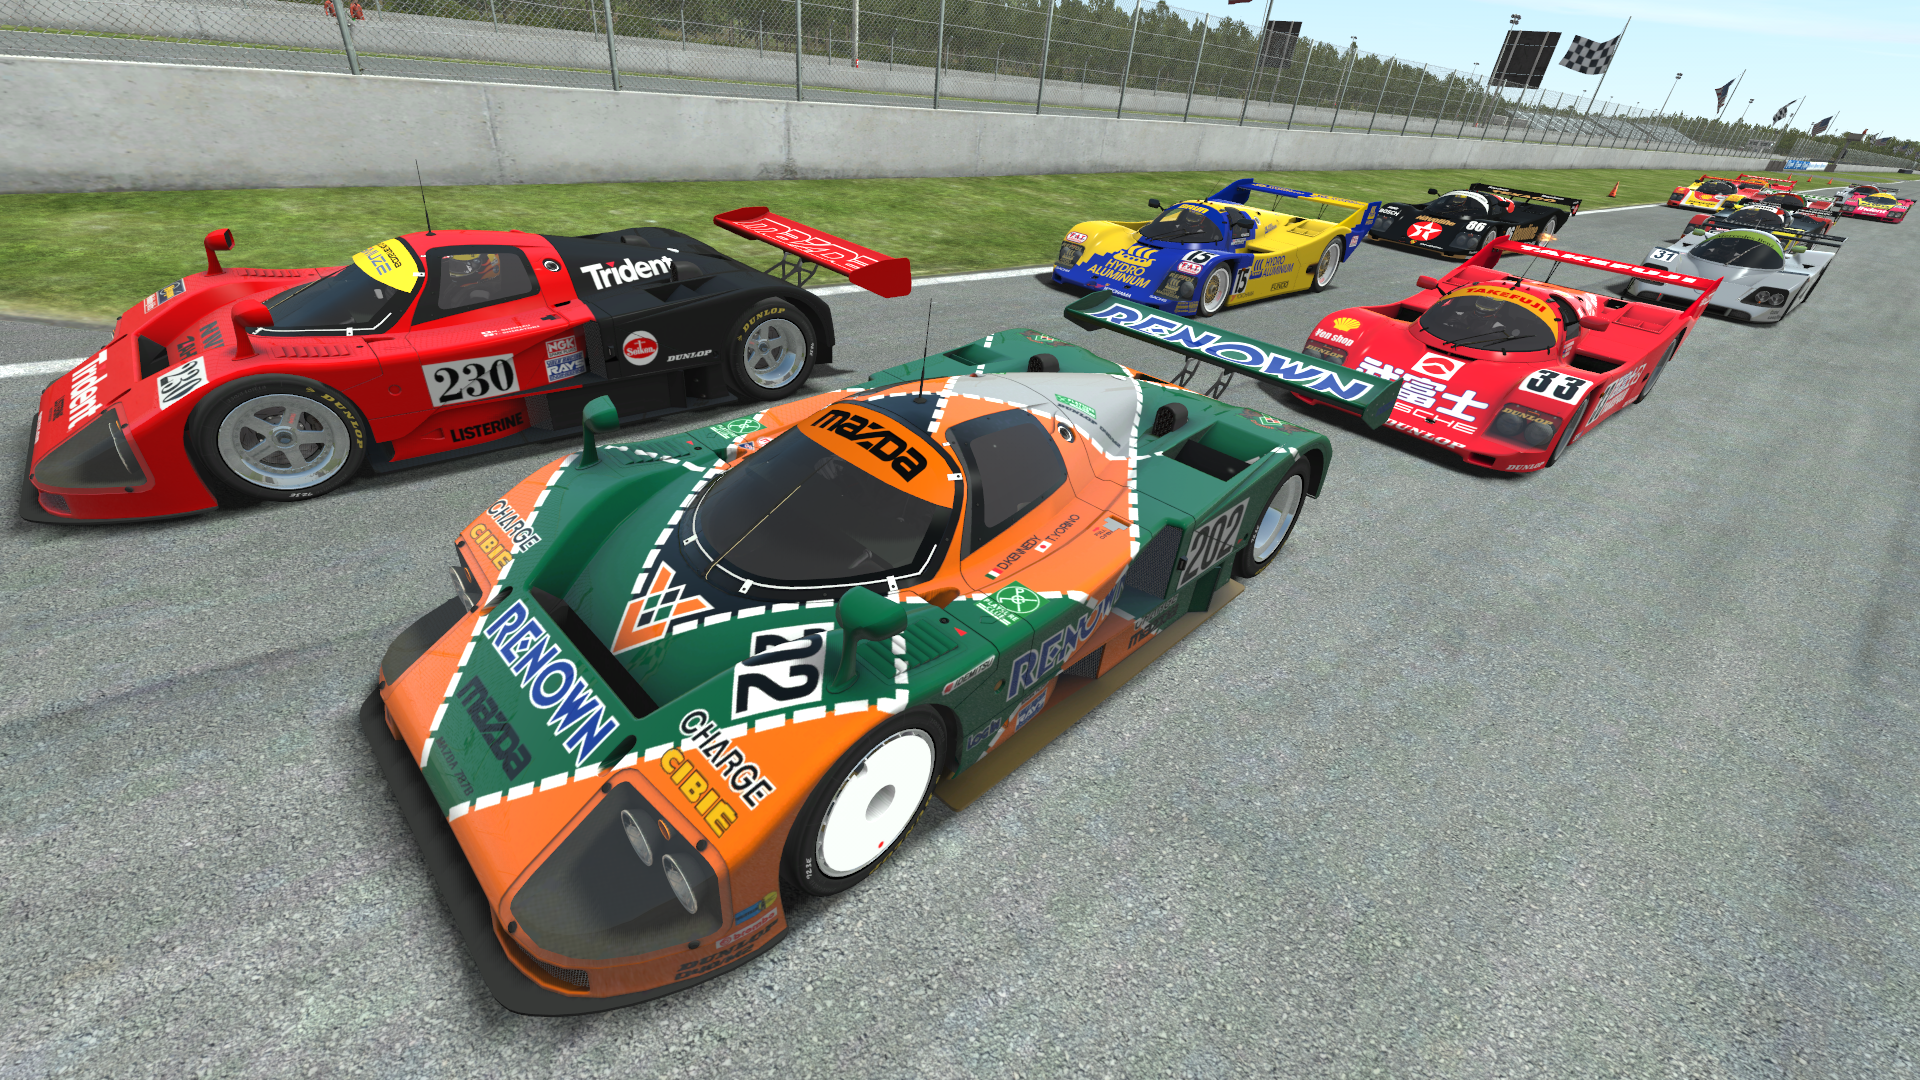 GROUP C for RF2 GRAB_026